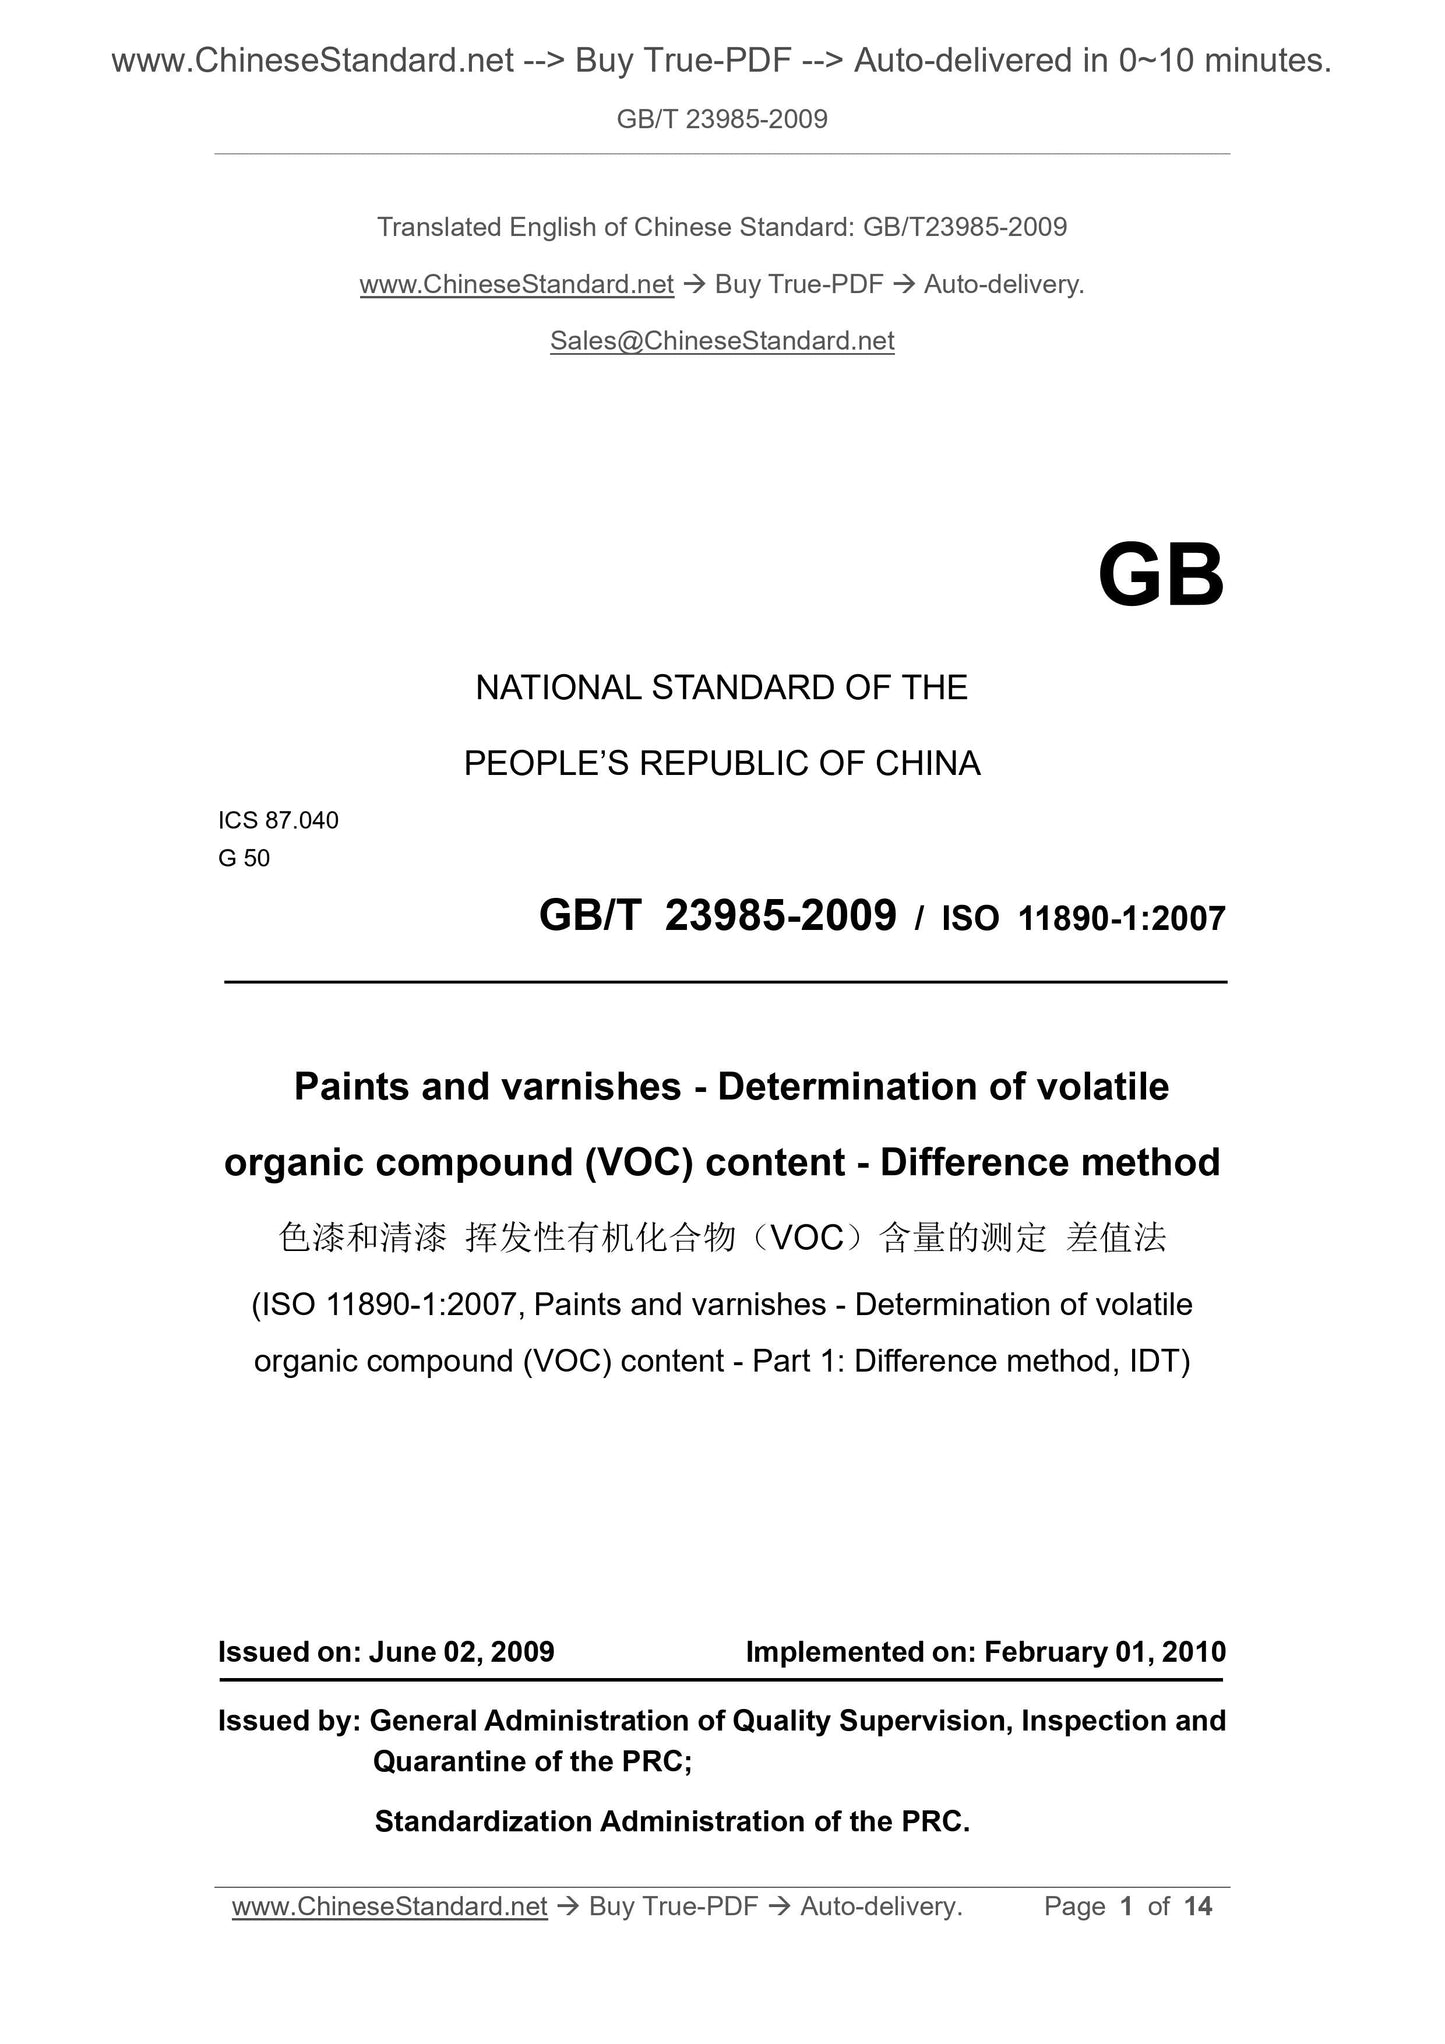 GB/T 23985-2009 Page 1